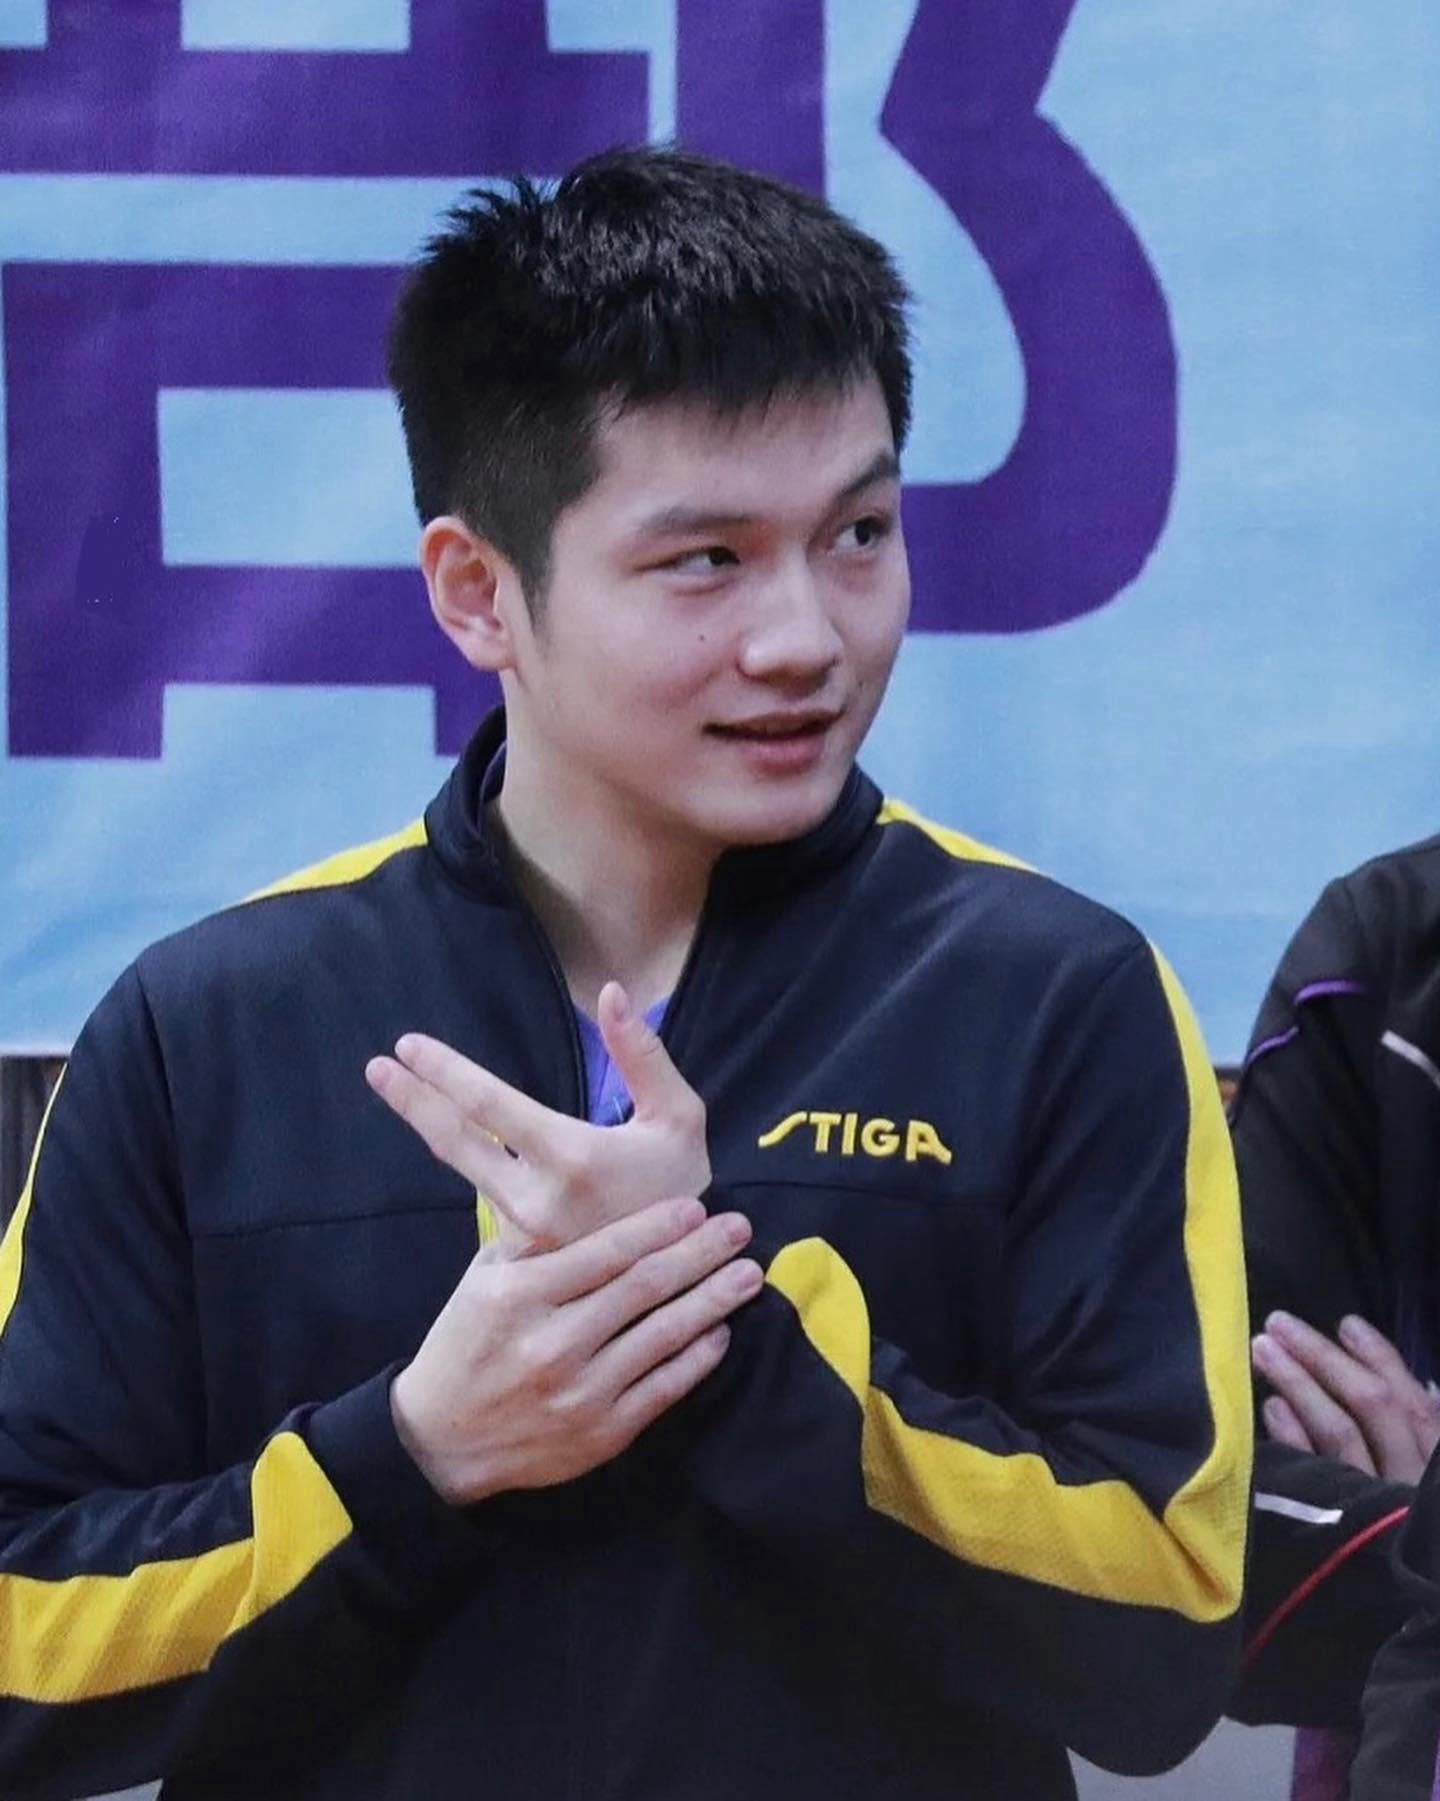 image  1 FanZhendong 樊振東 小胖 东哥 - Post of the day : 23/8/2022